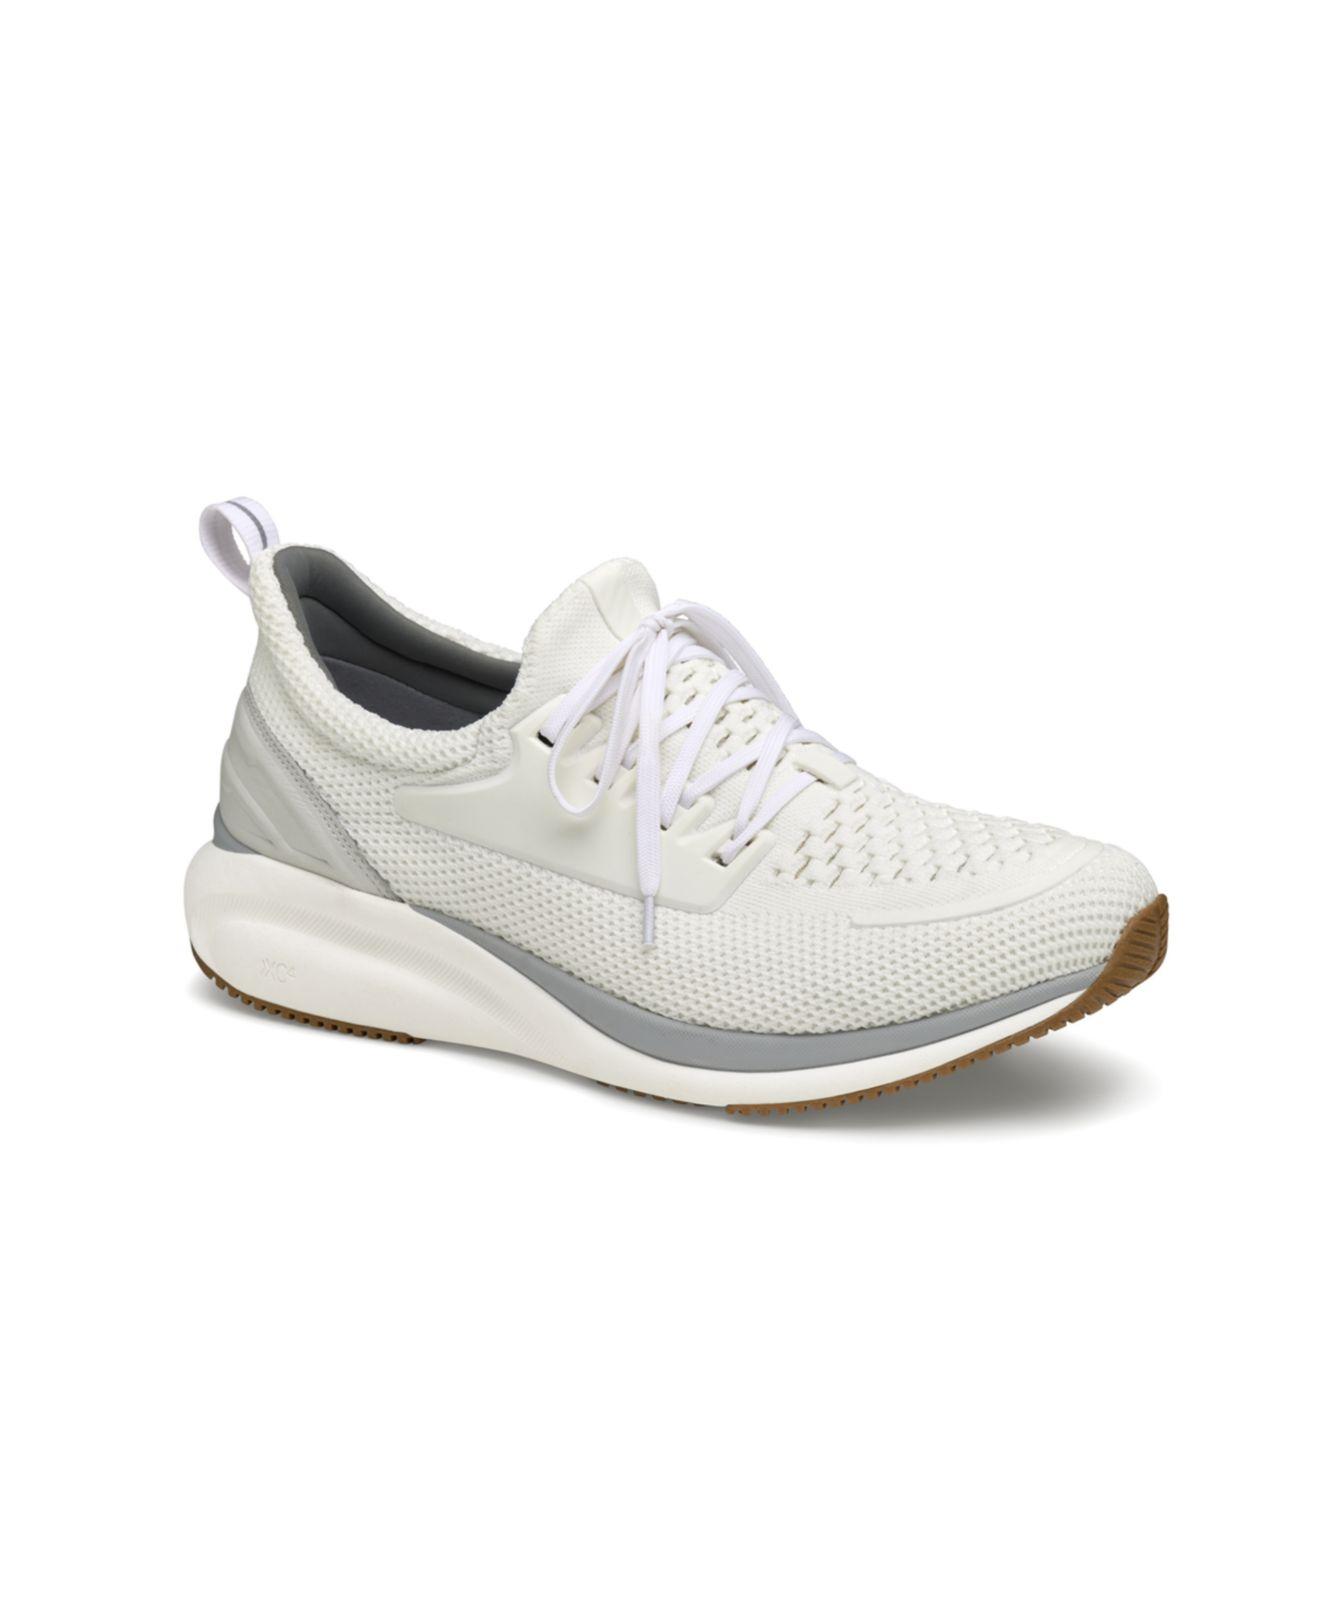 Johnston & Murphy Xc4 Tr1 Sport Hybrid Lace-up Sneakers in White for ...